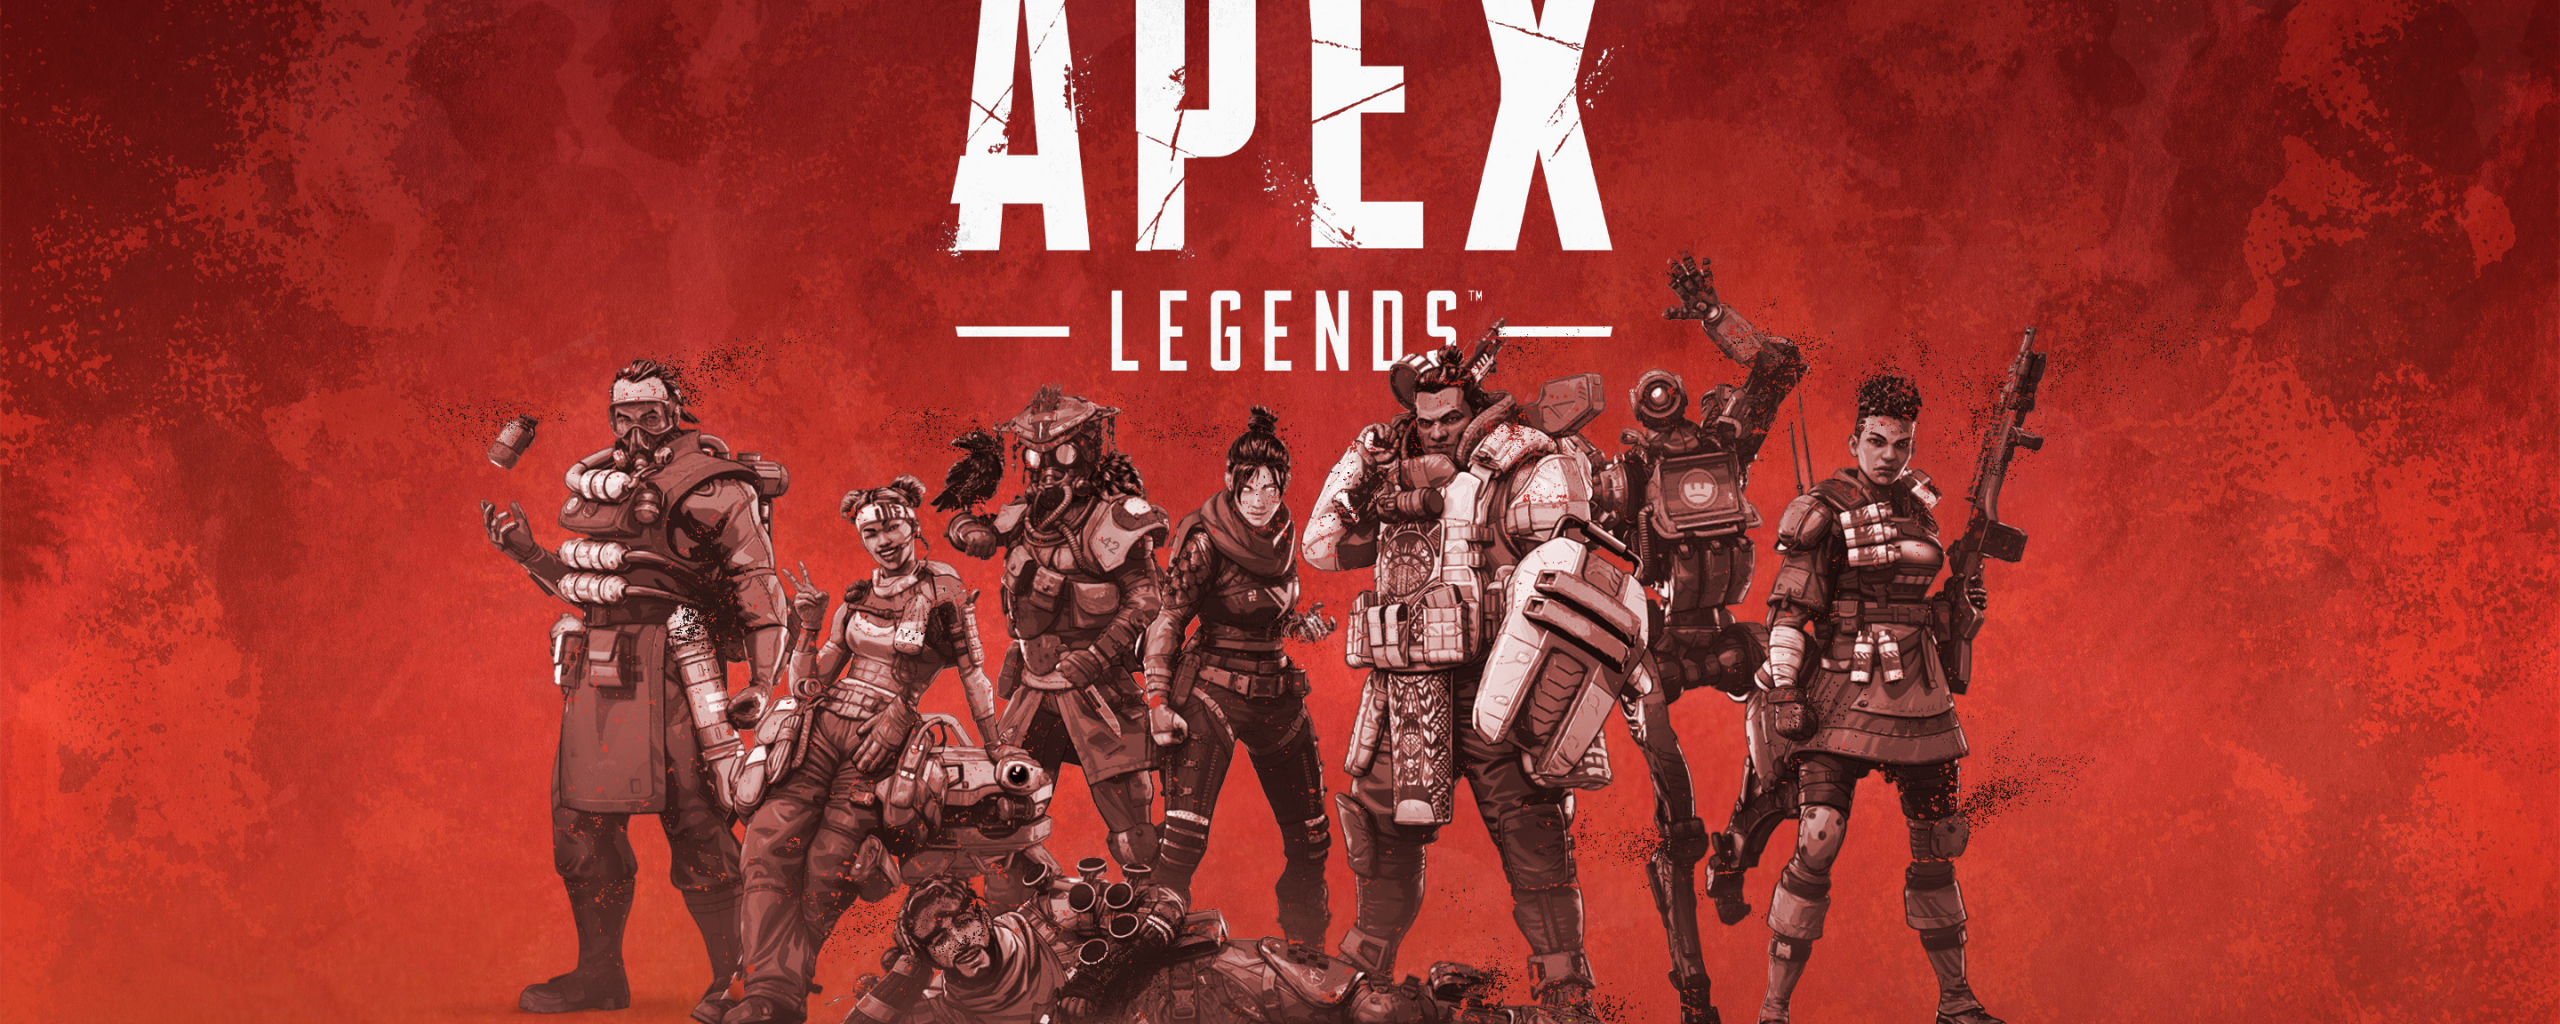 Download 2560x1024 Wallpaper Poster Video Game 19 Apex Legends Dual Wide Wide 21 9 Widescreen 2560x1024 Hd Image Background